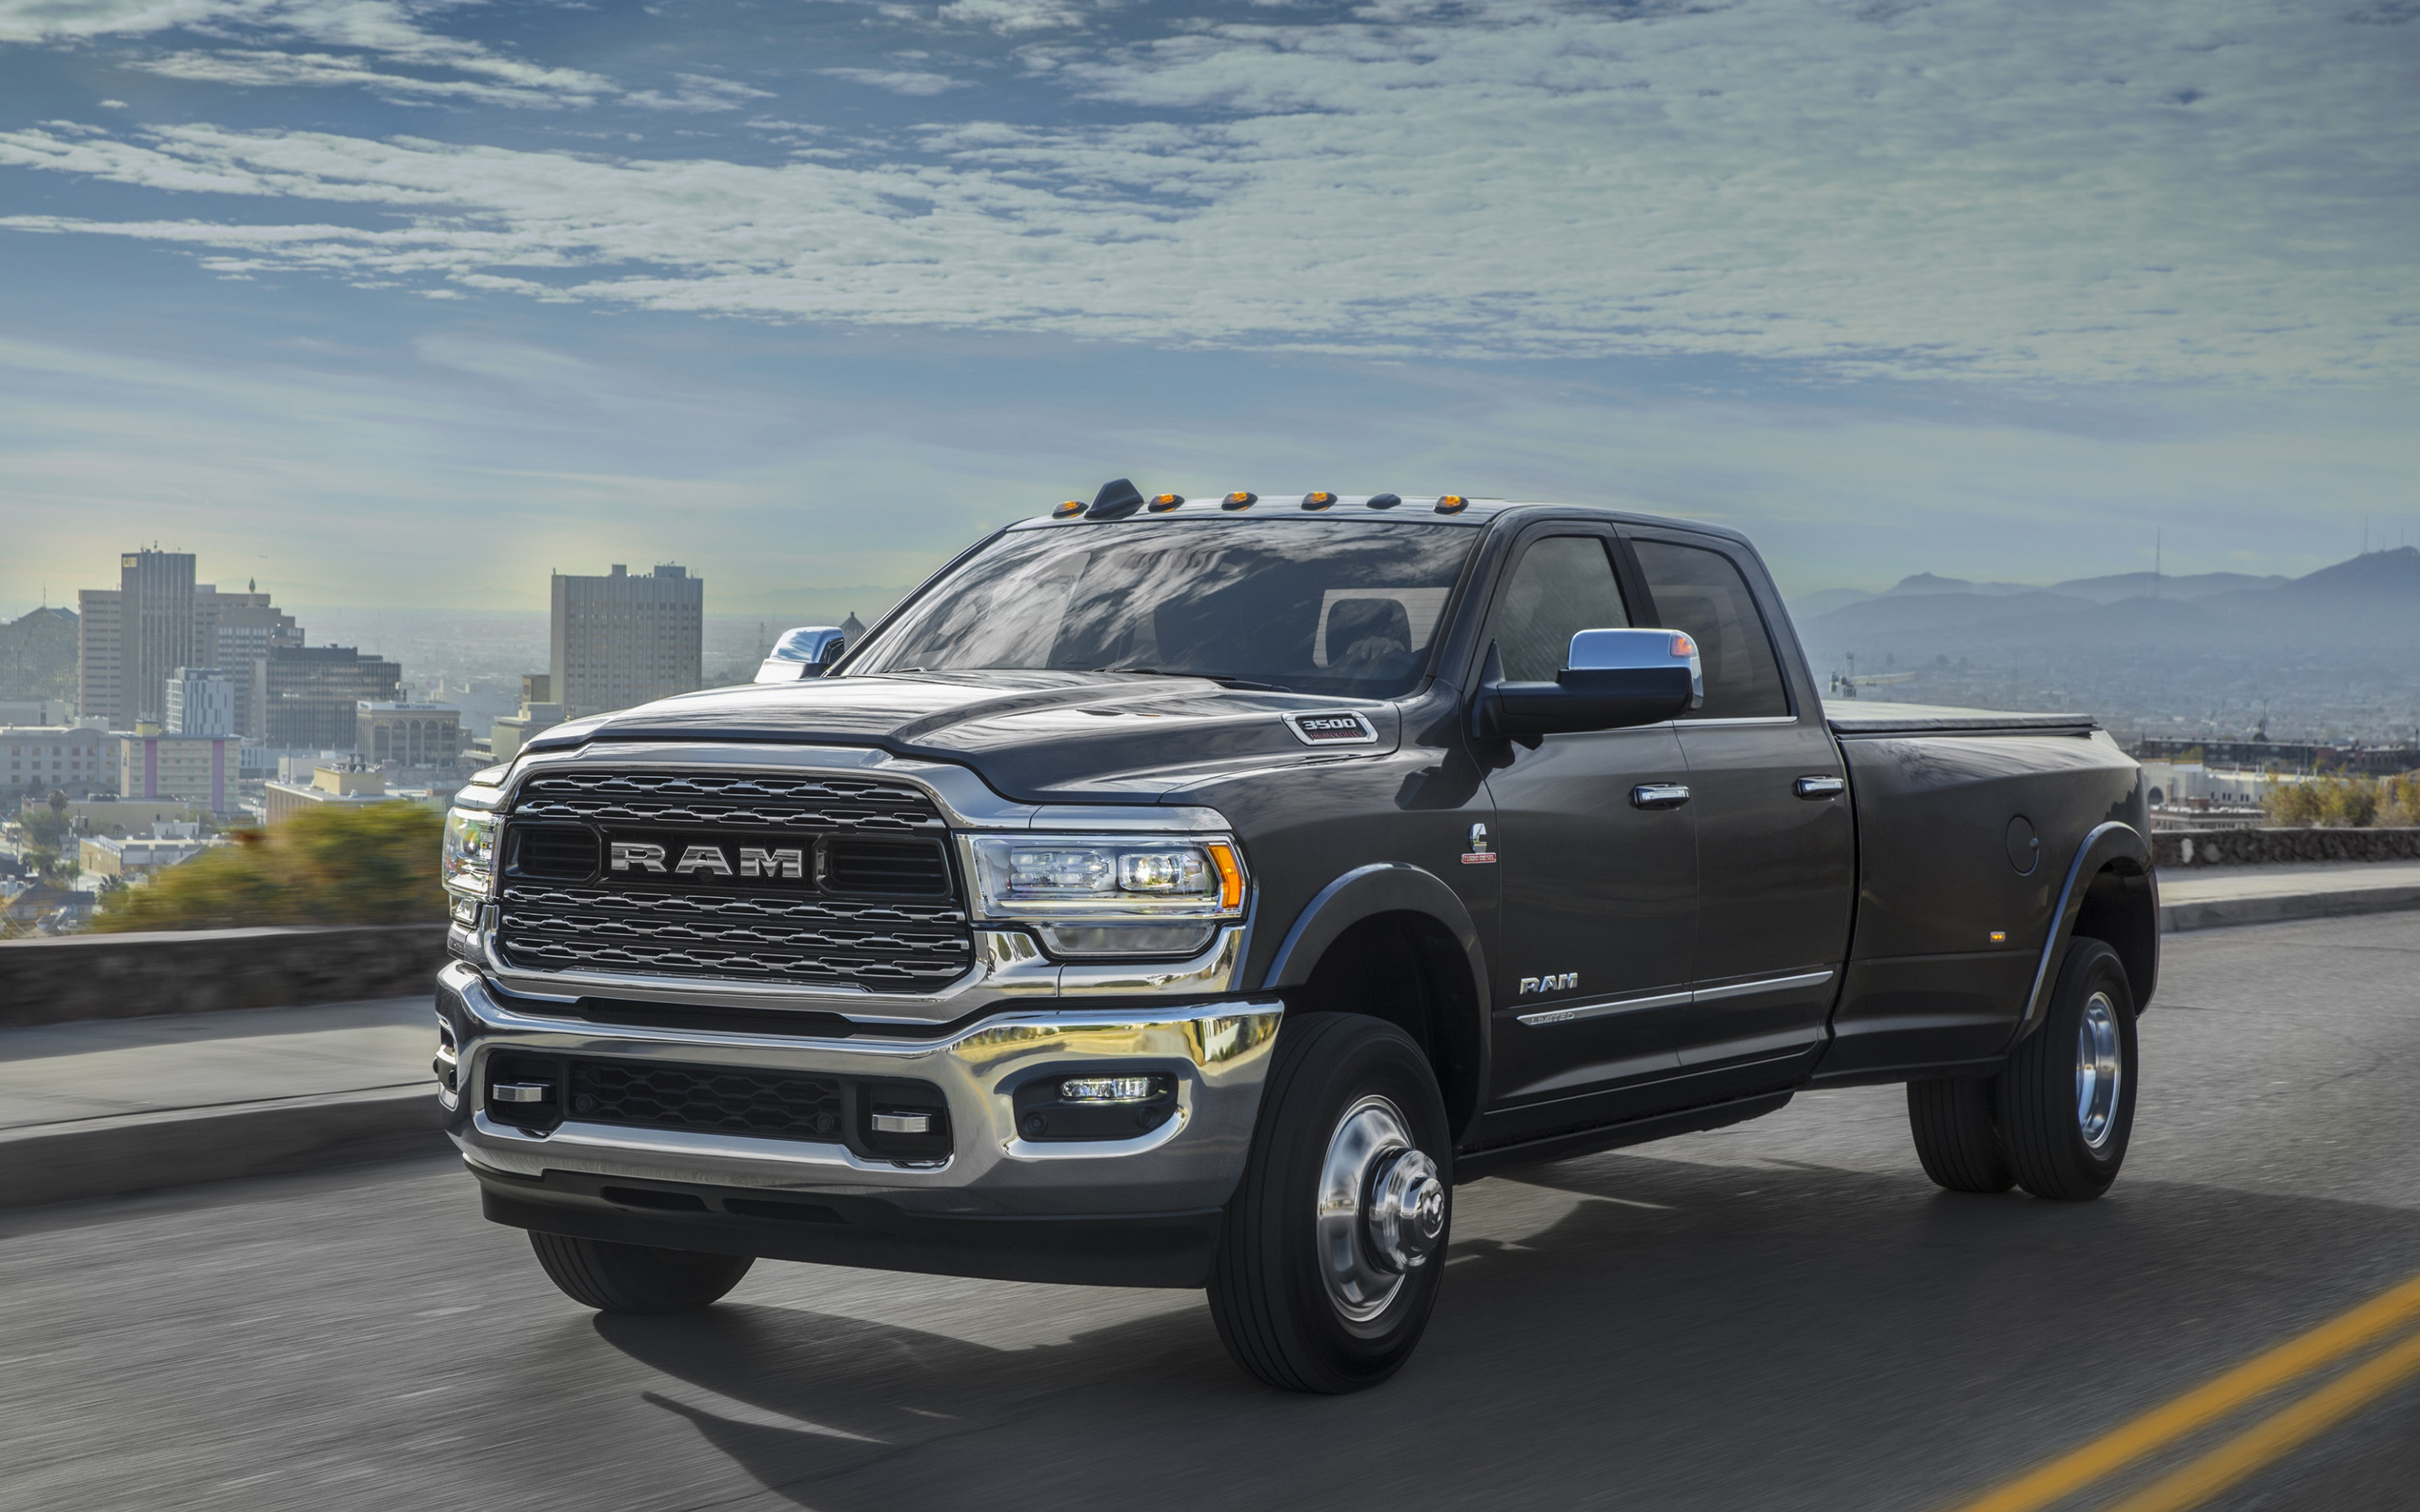 Ram 3500, Limited edition model, Cutting-edge technology, Unmatched performance, 2880x1800 HD Desktop